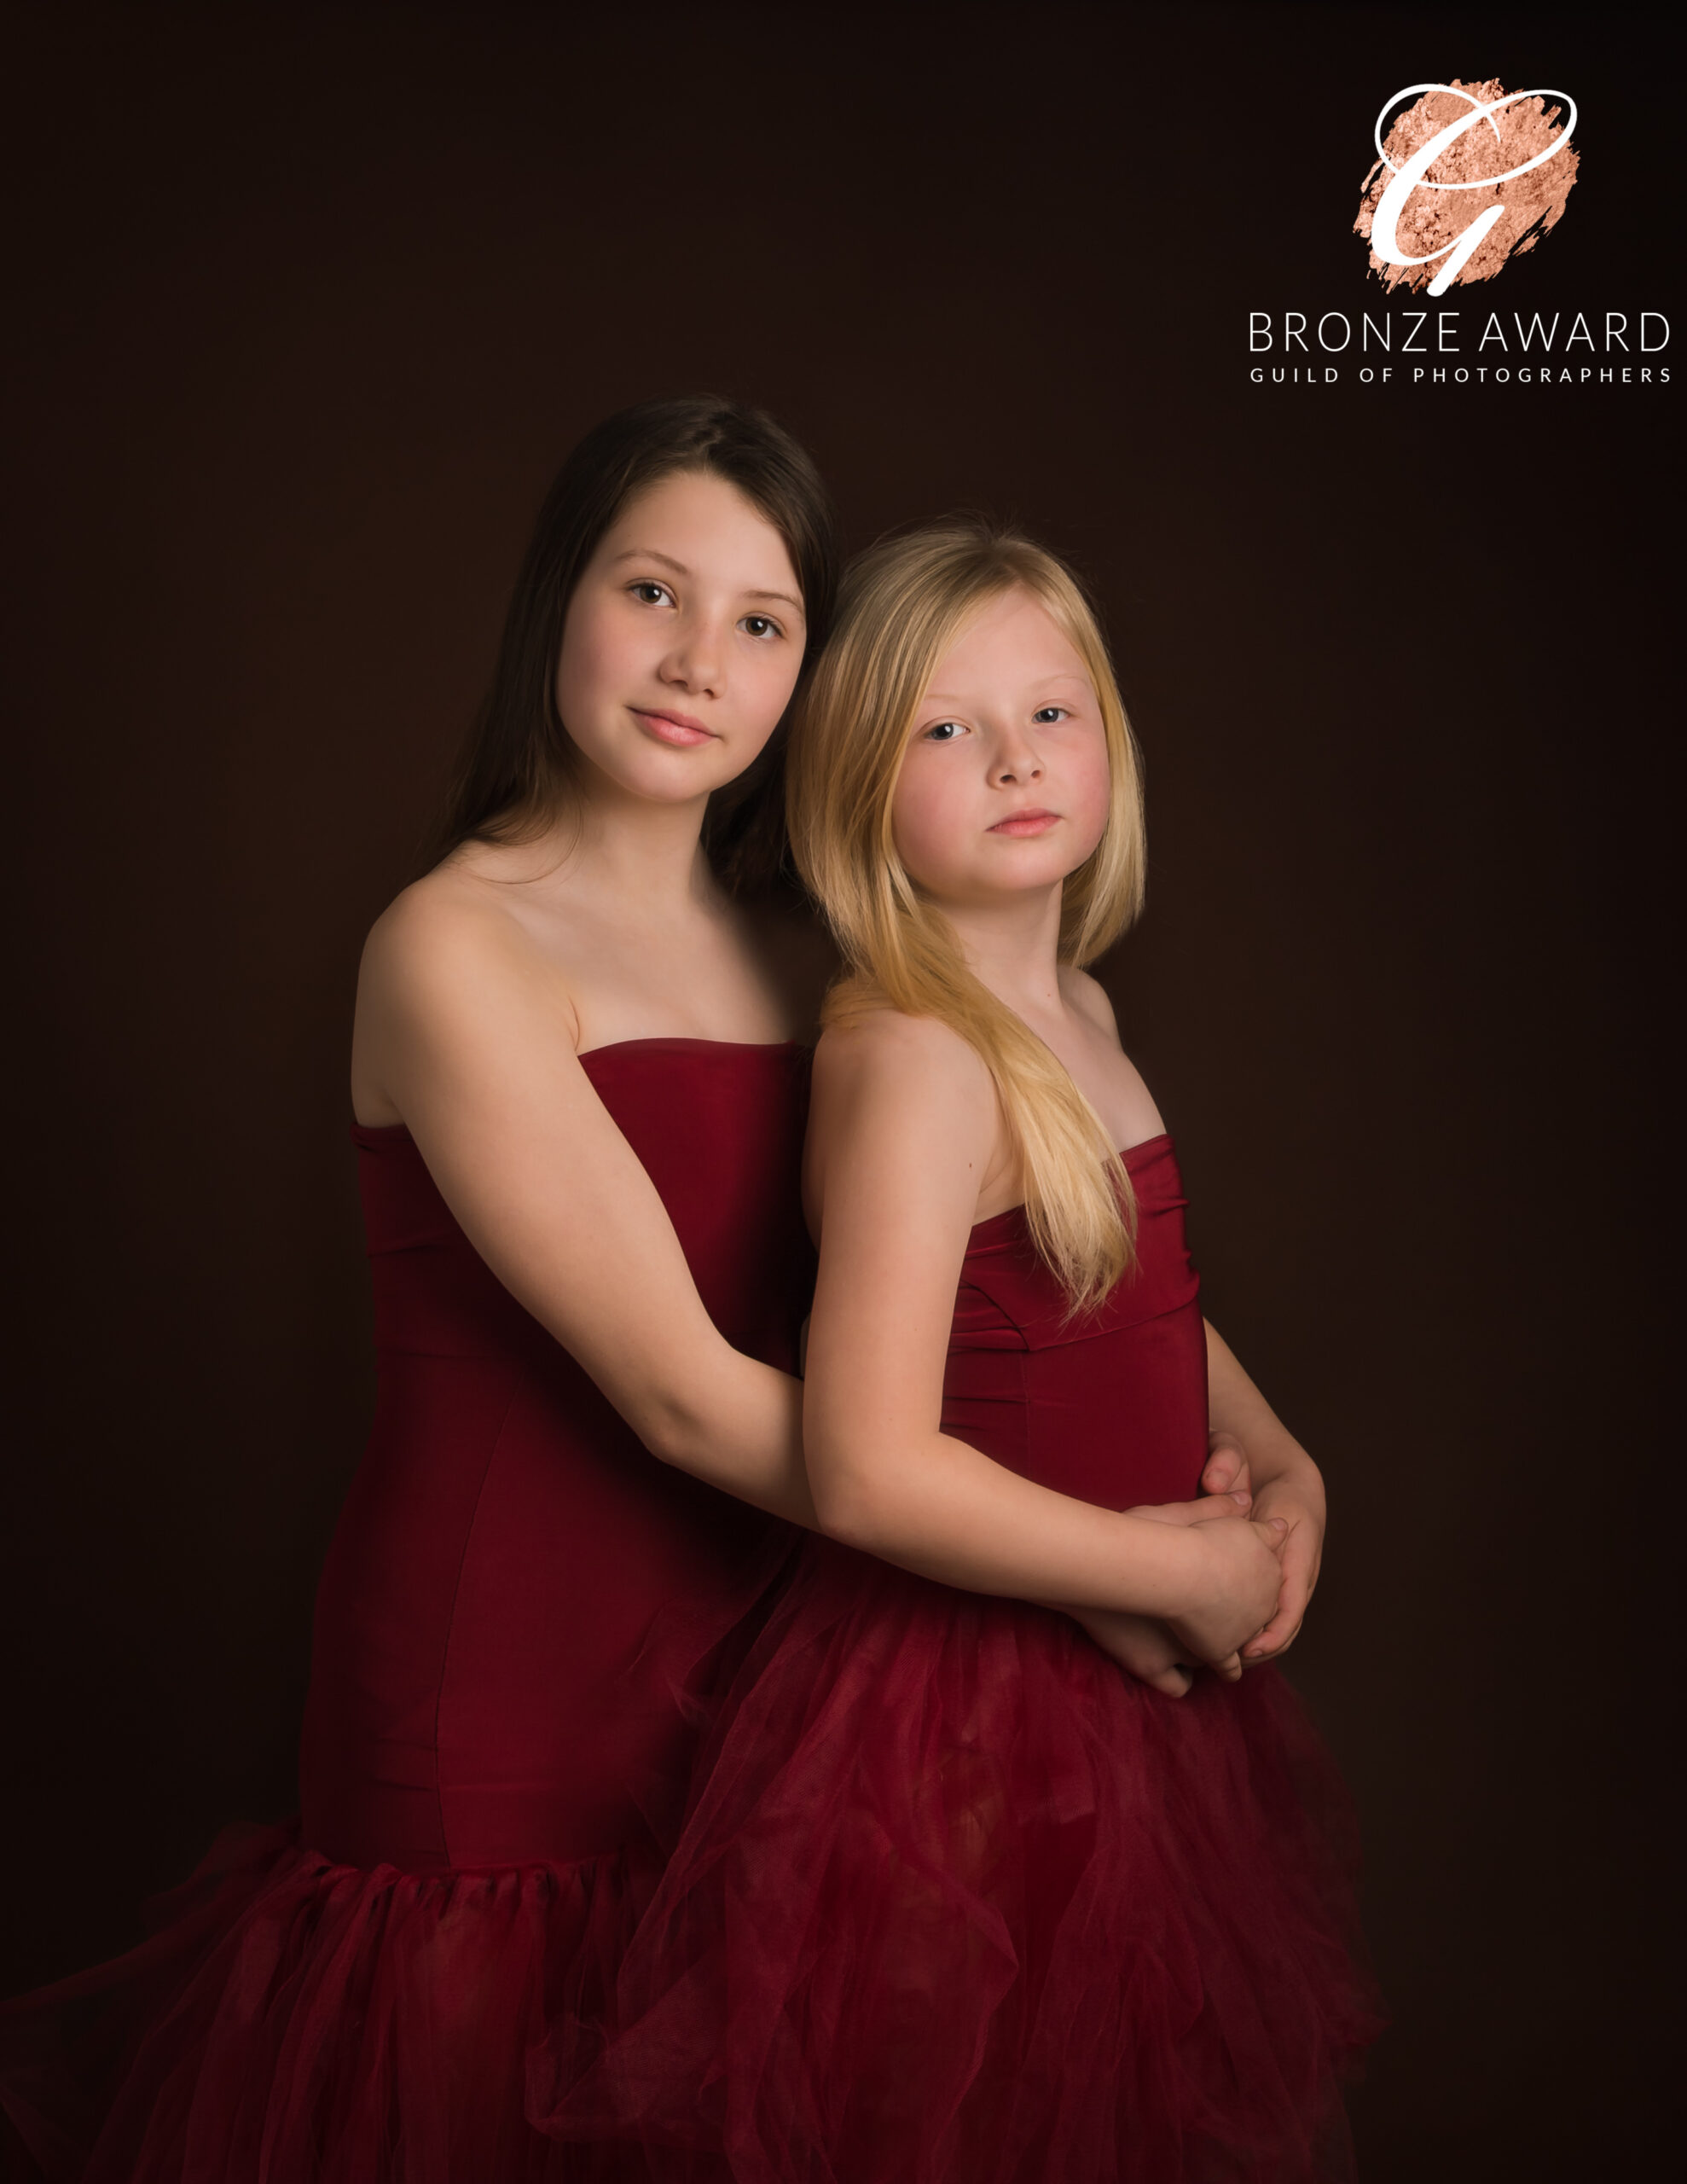 award winning photo of two girls togther for a blog about Prepare Your Children for a Studio Photoshoot